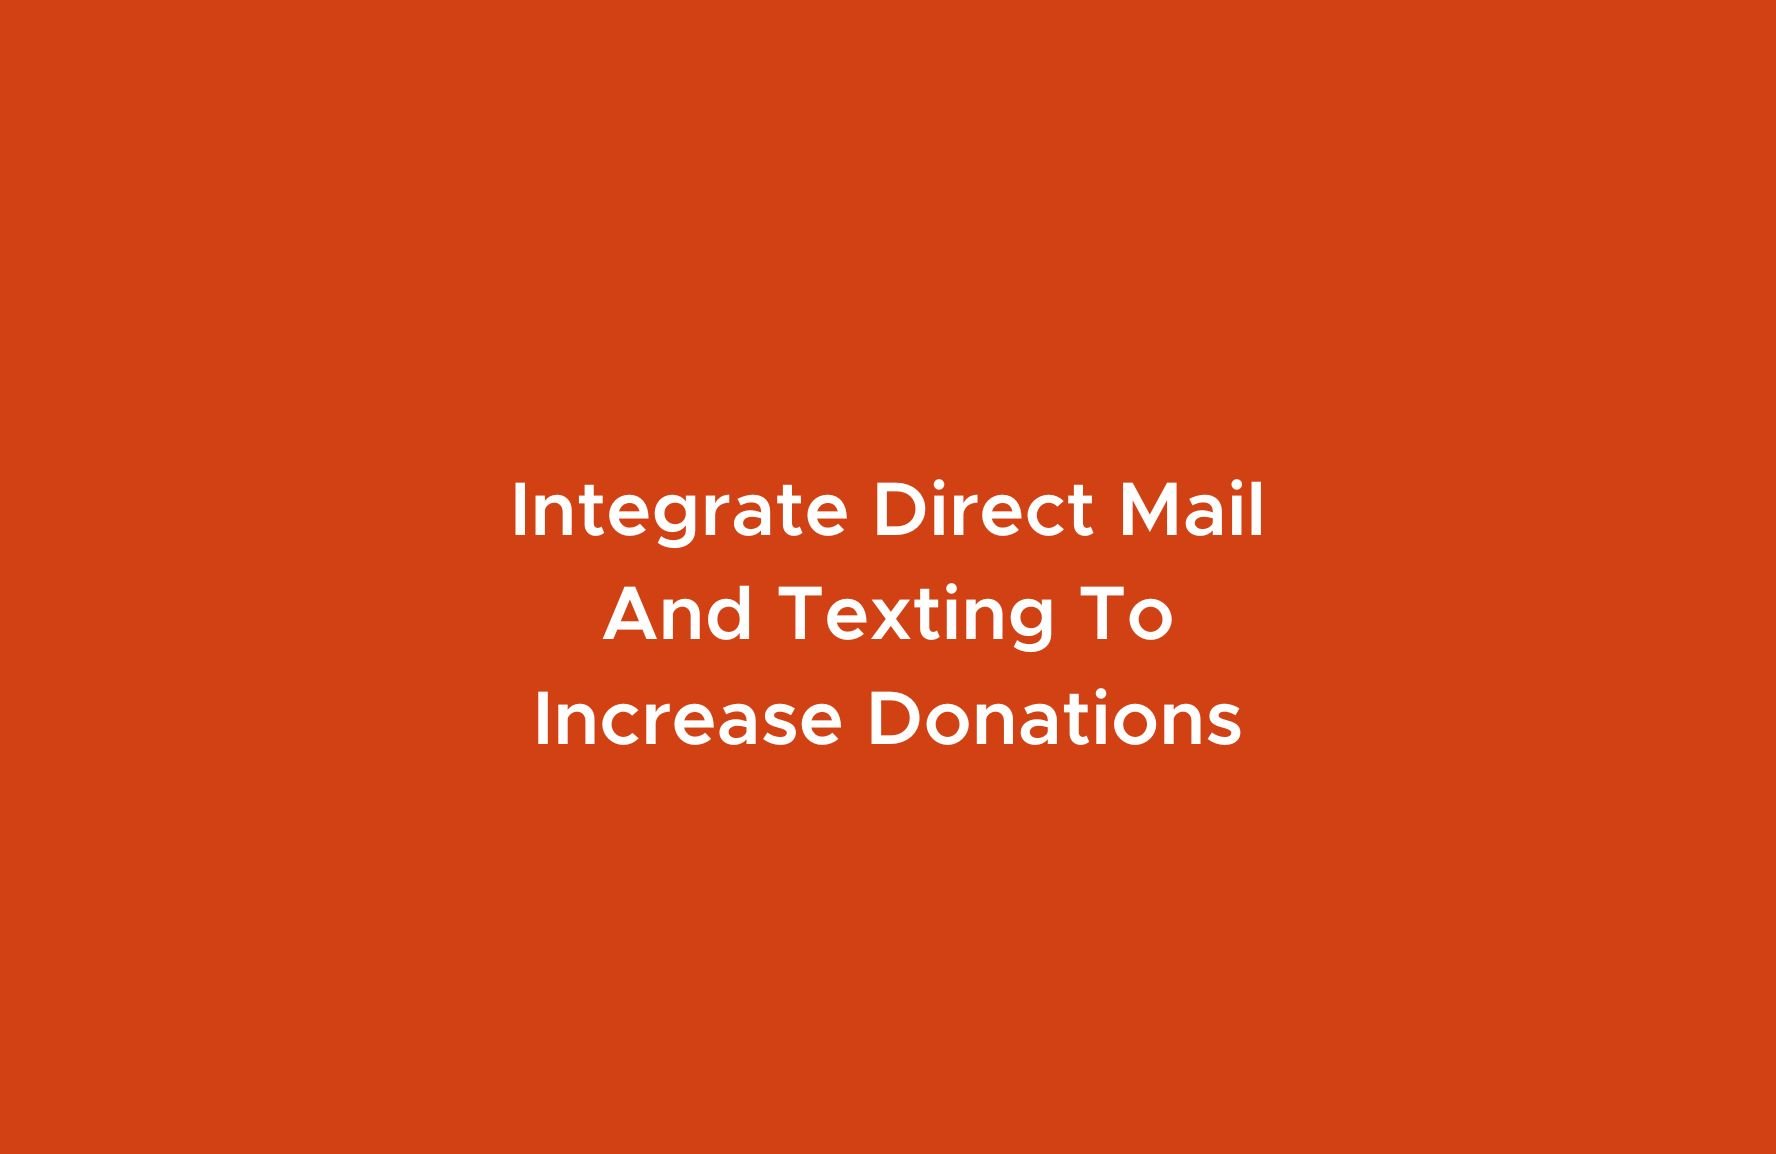 Nonprofit direct mail and nonprofit text messaging services can work together to increase donations.